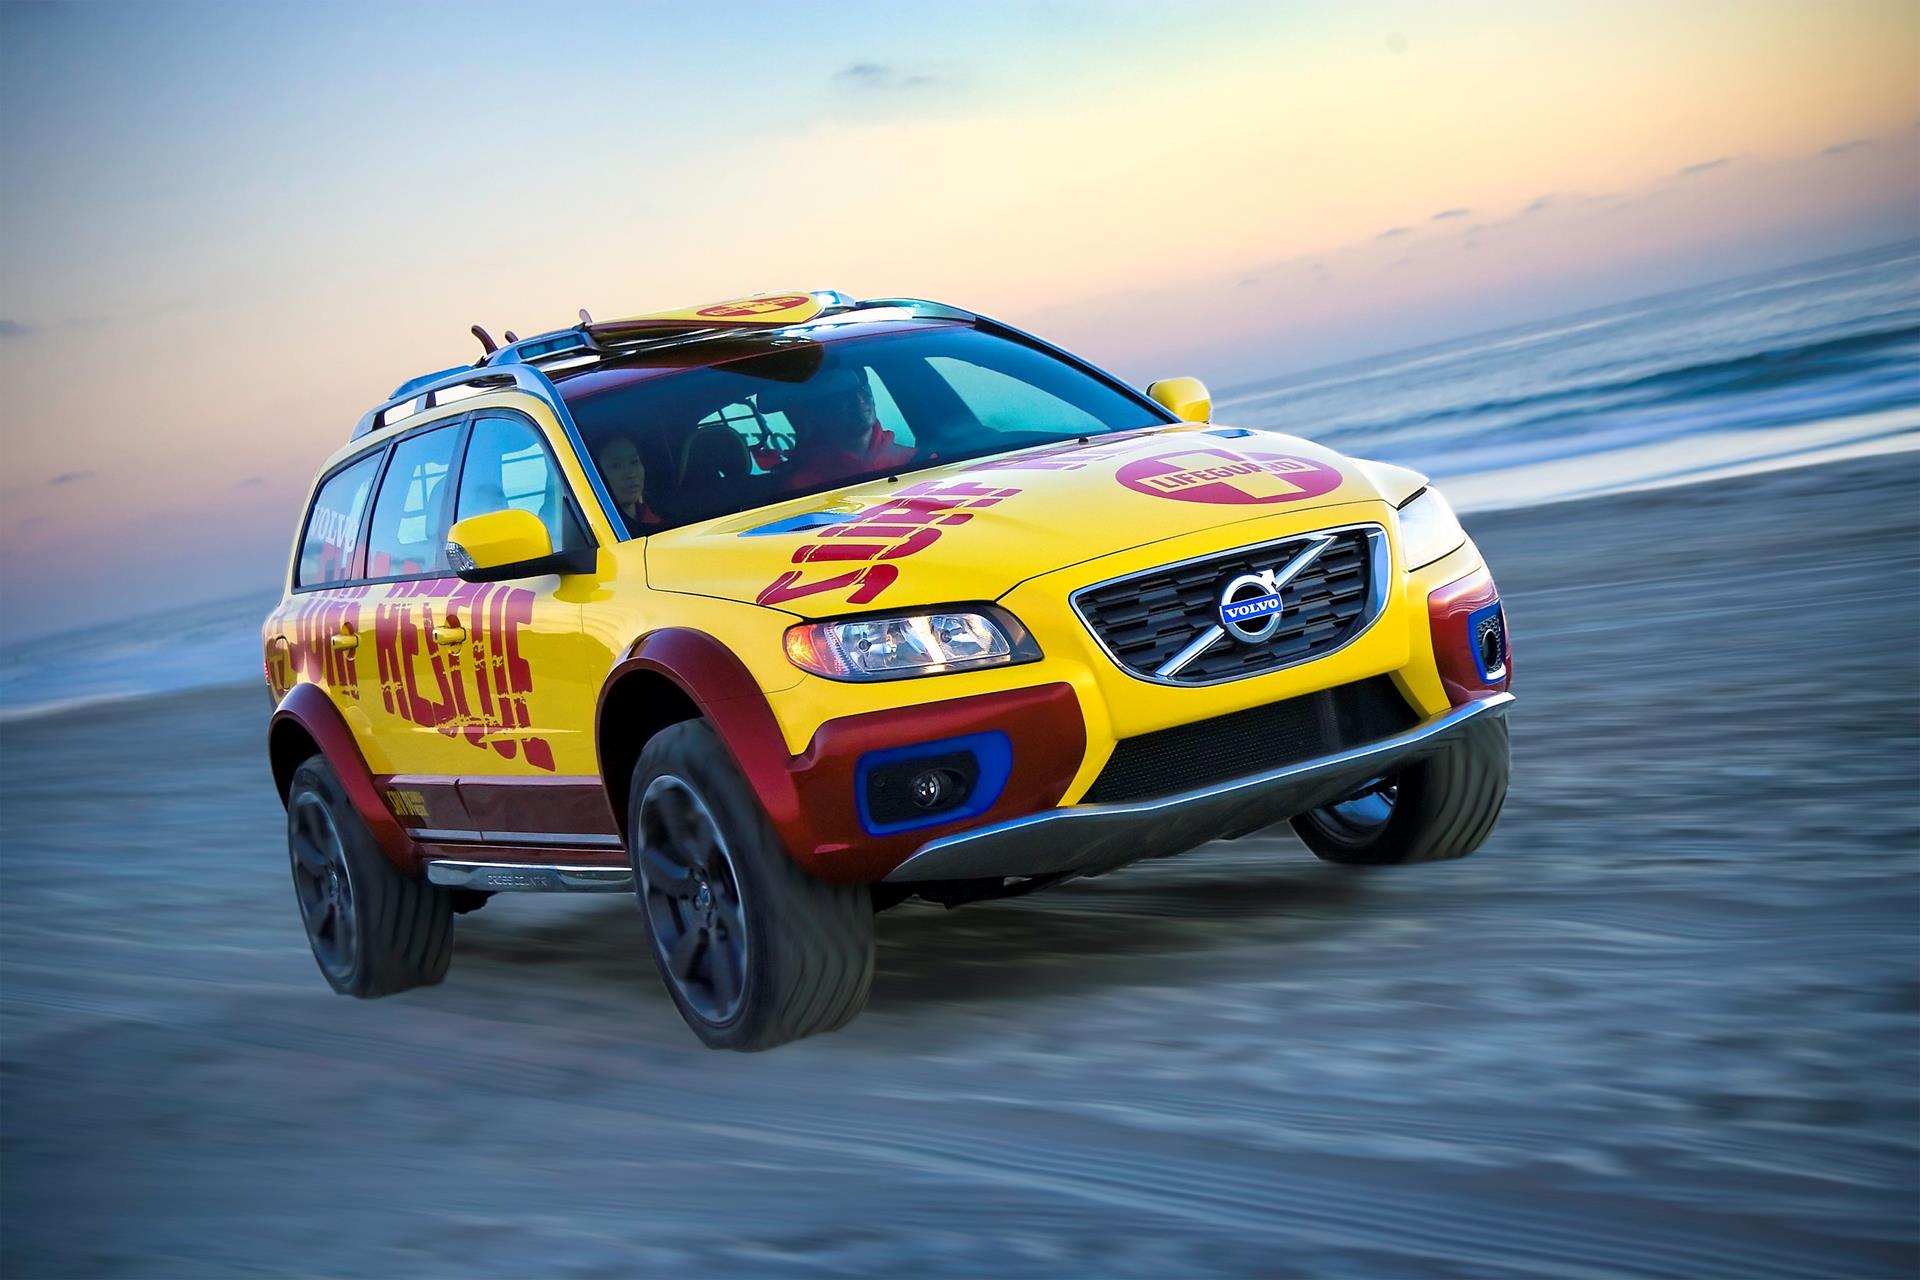 2007 Volvo XC70 Surf Rescue Safety Concept